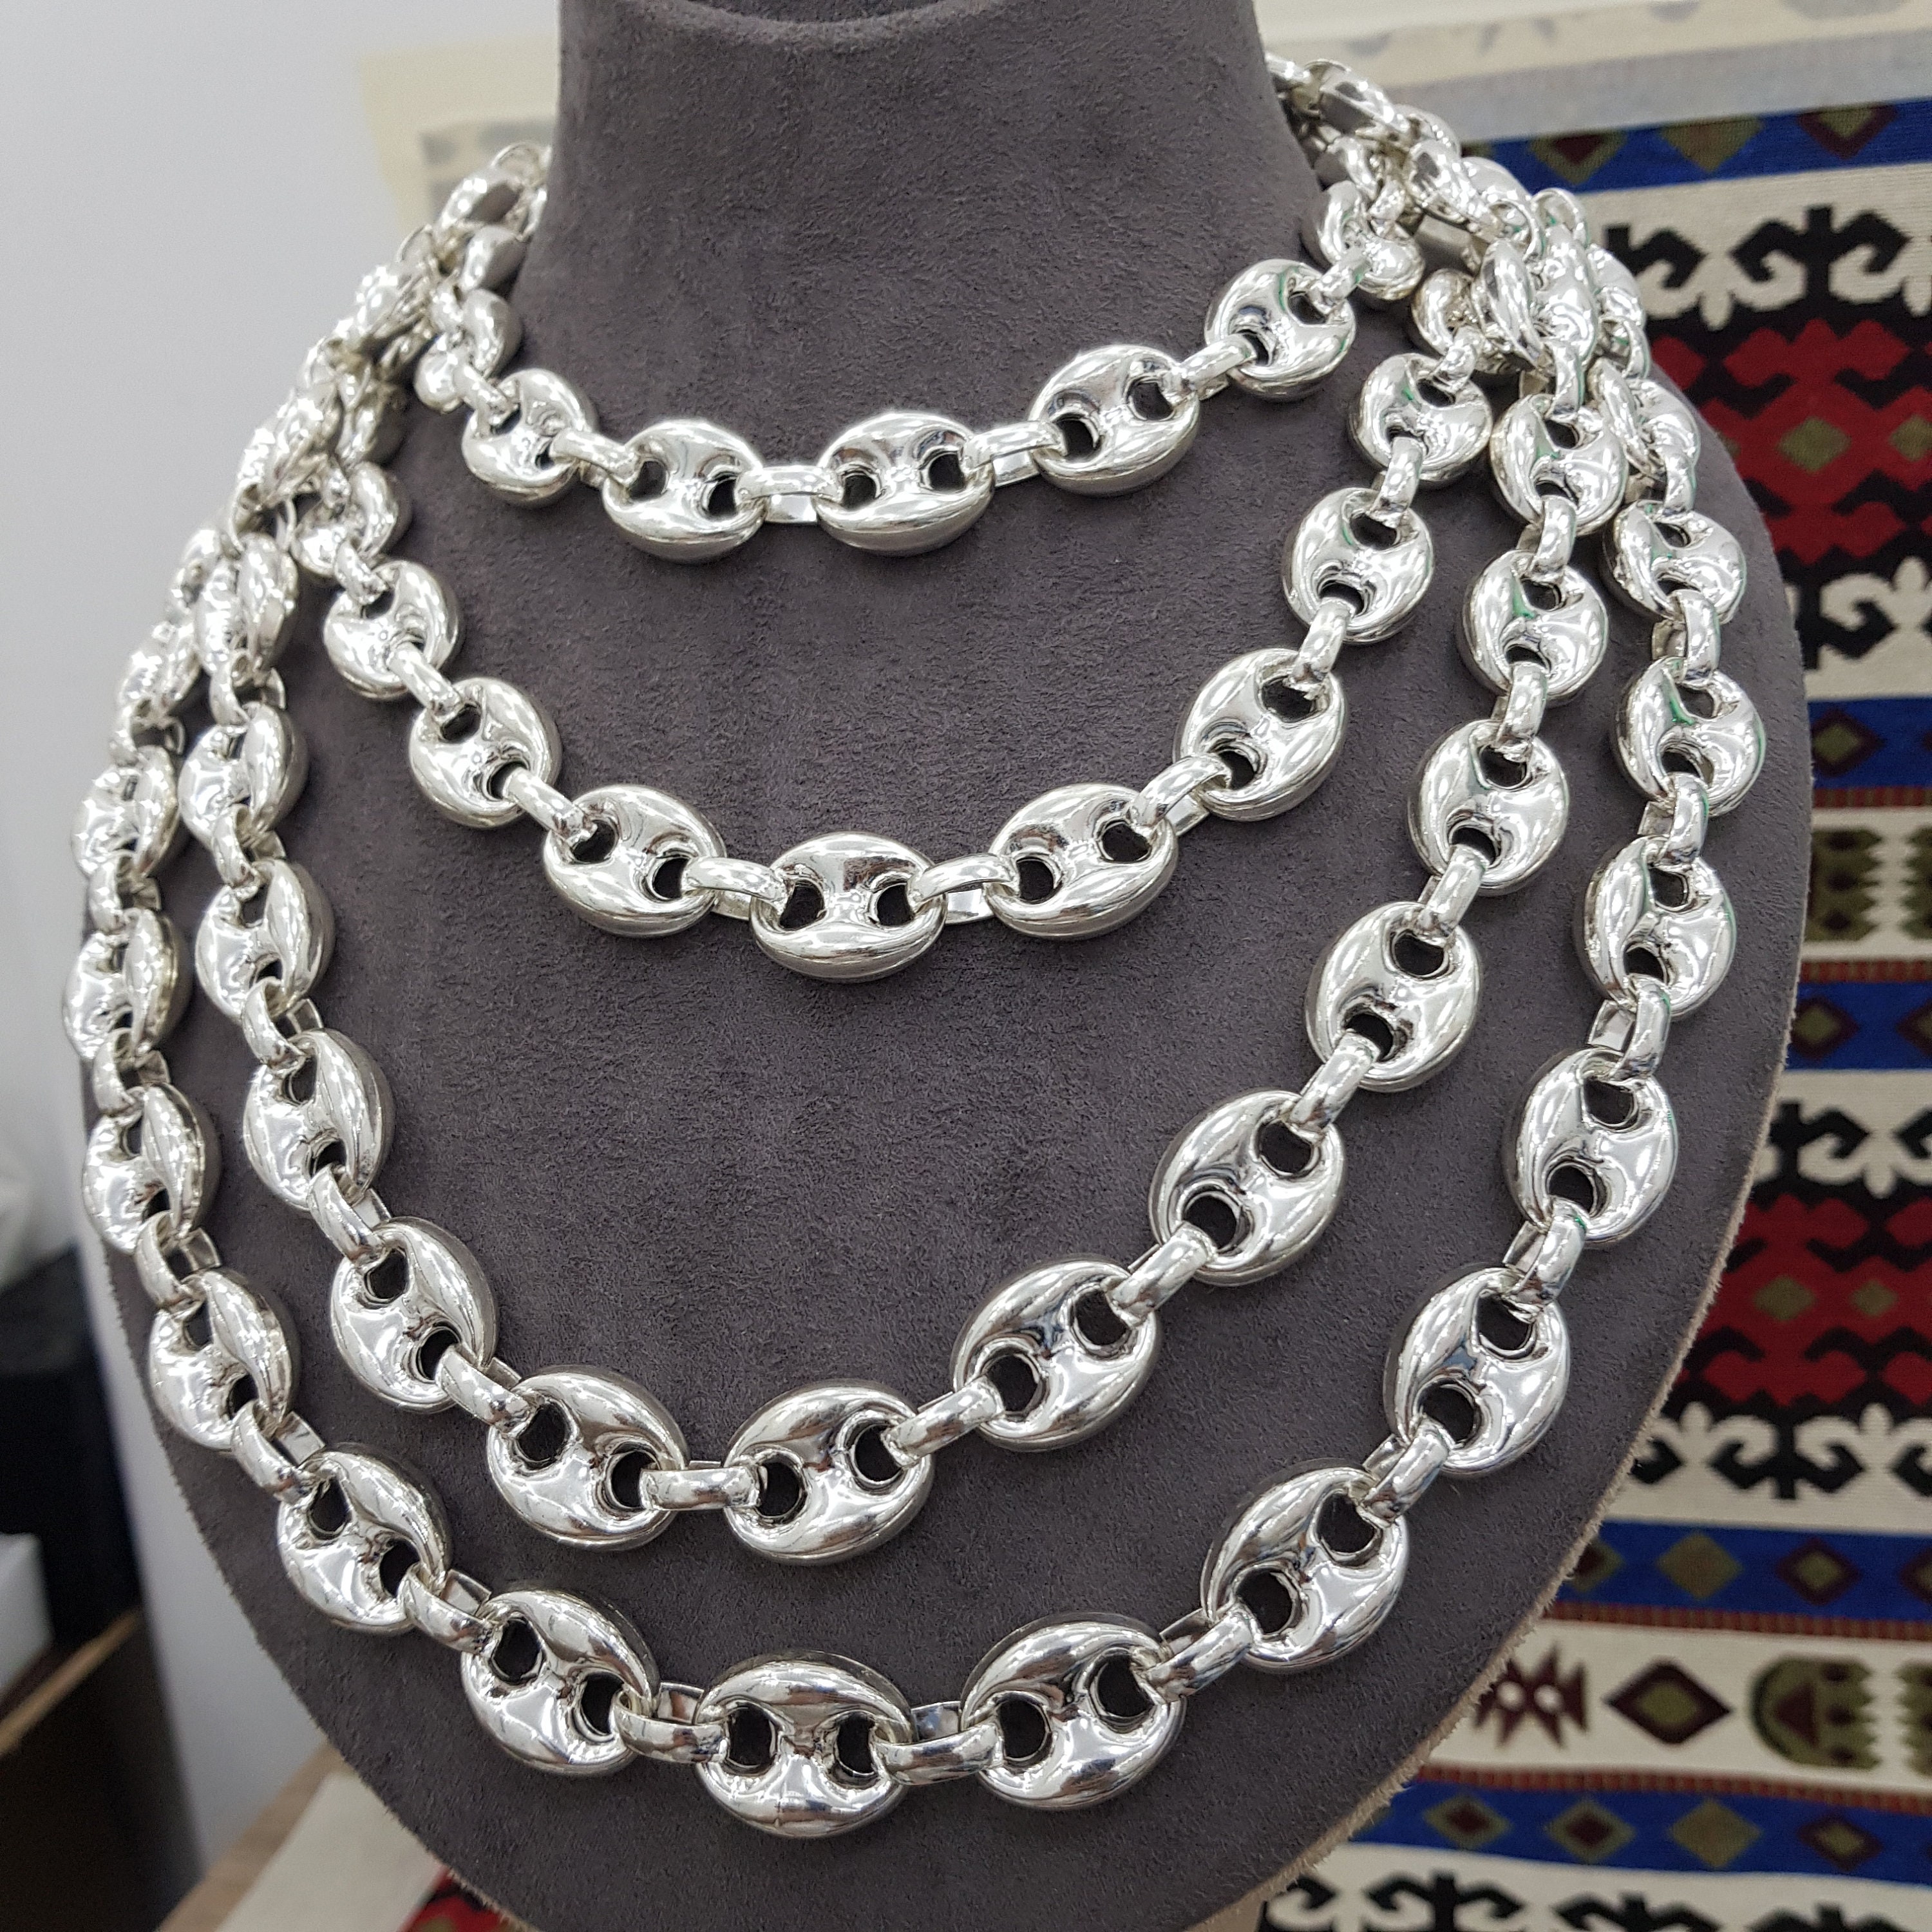 Bicolore Chunky Large Decorative Chain (2 Lengths), 30cm